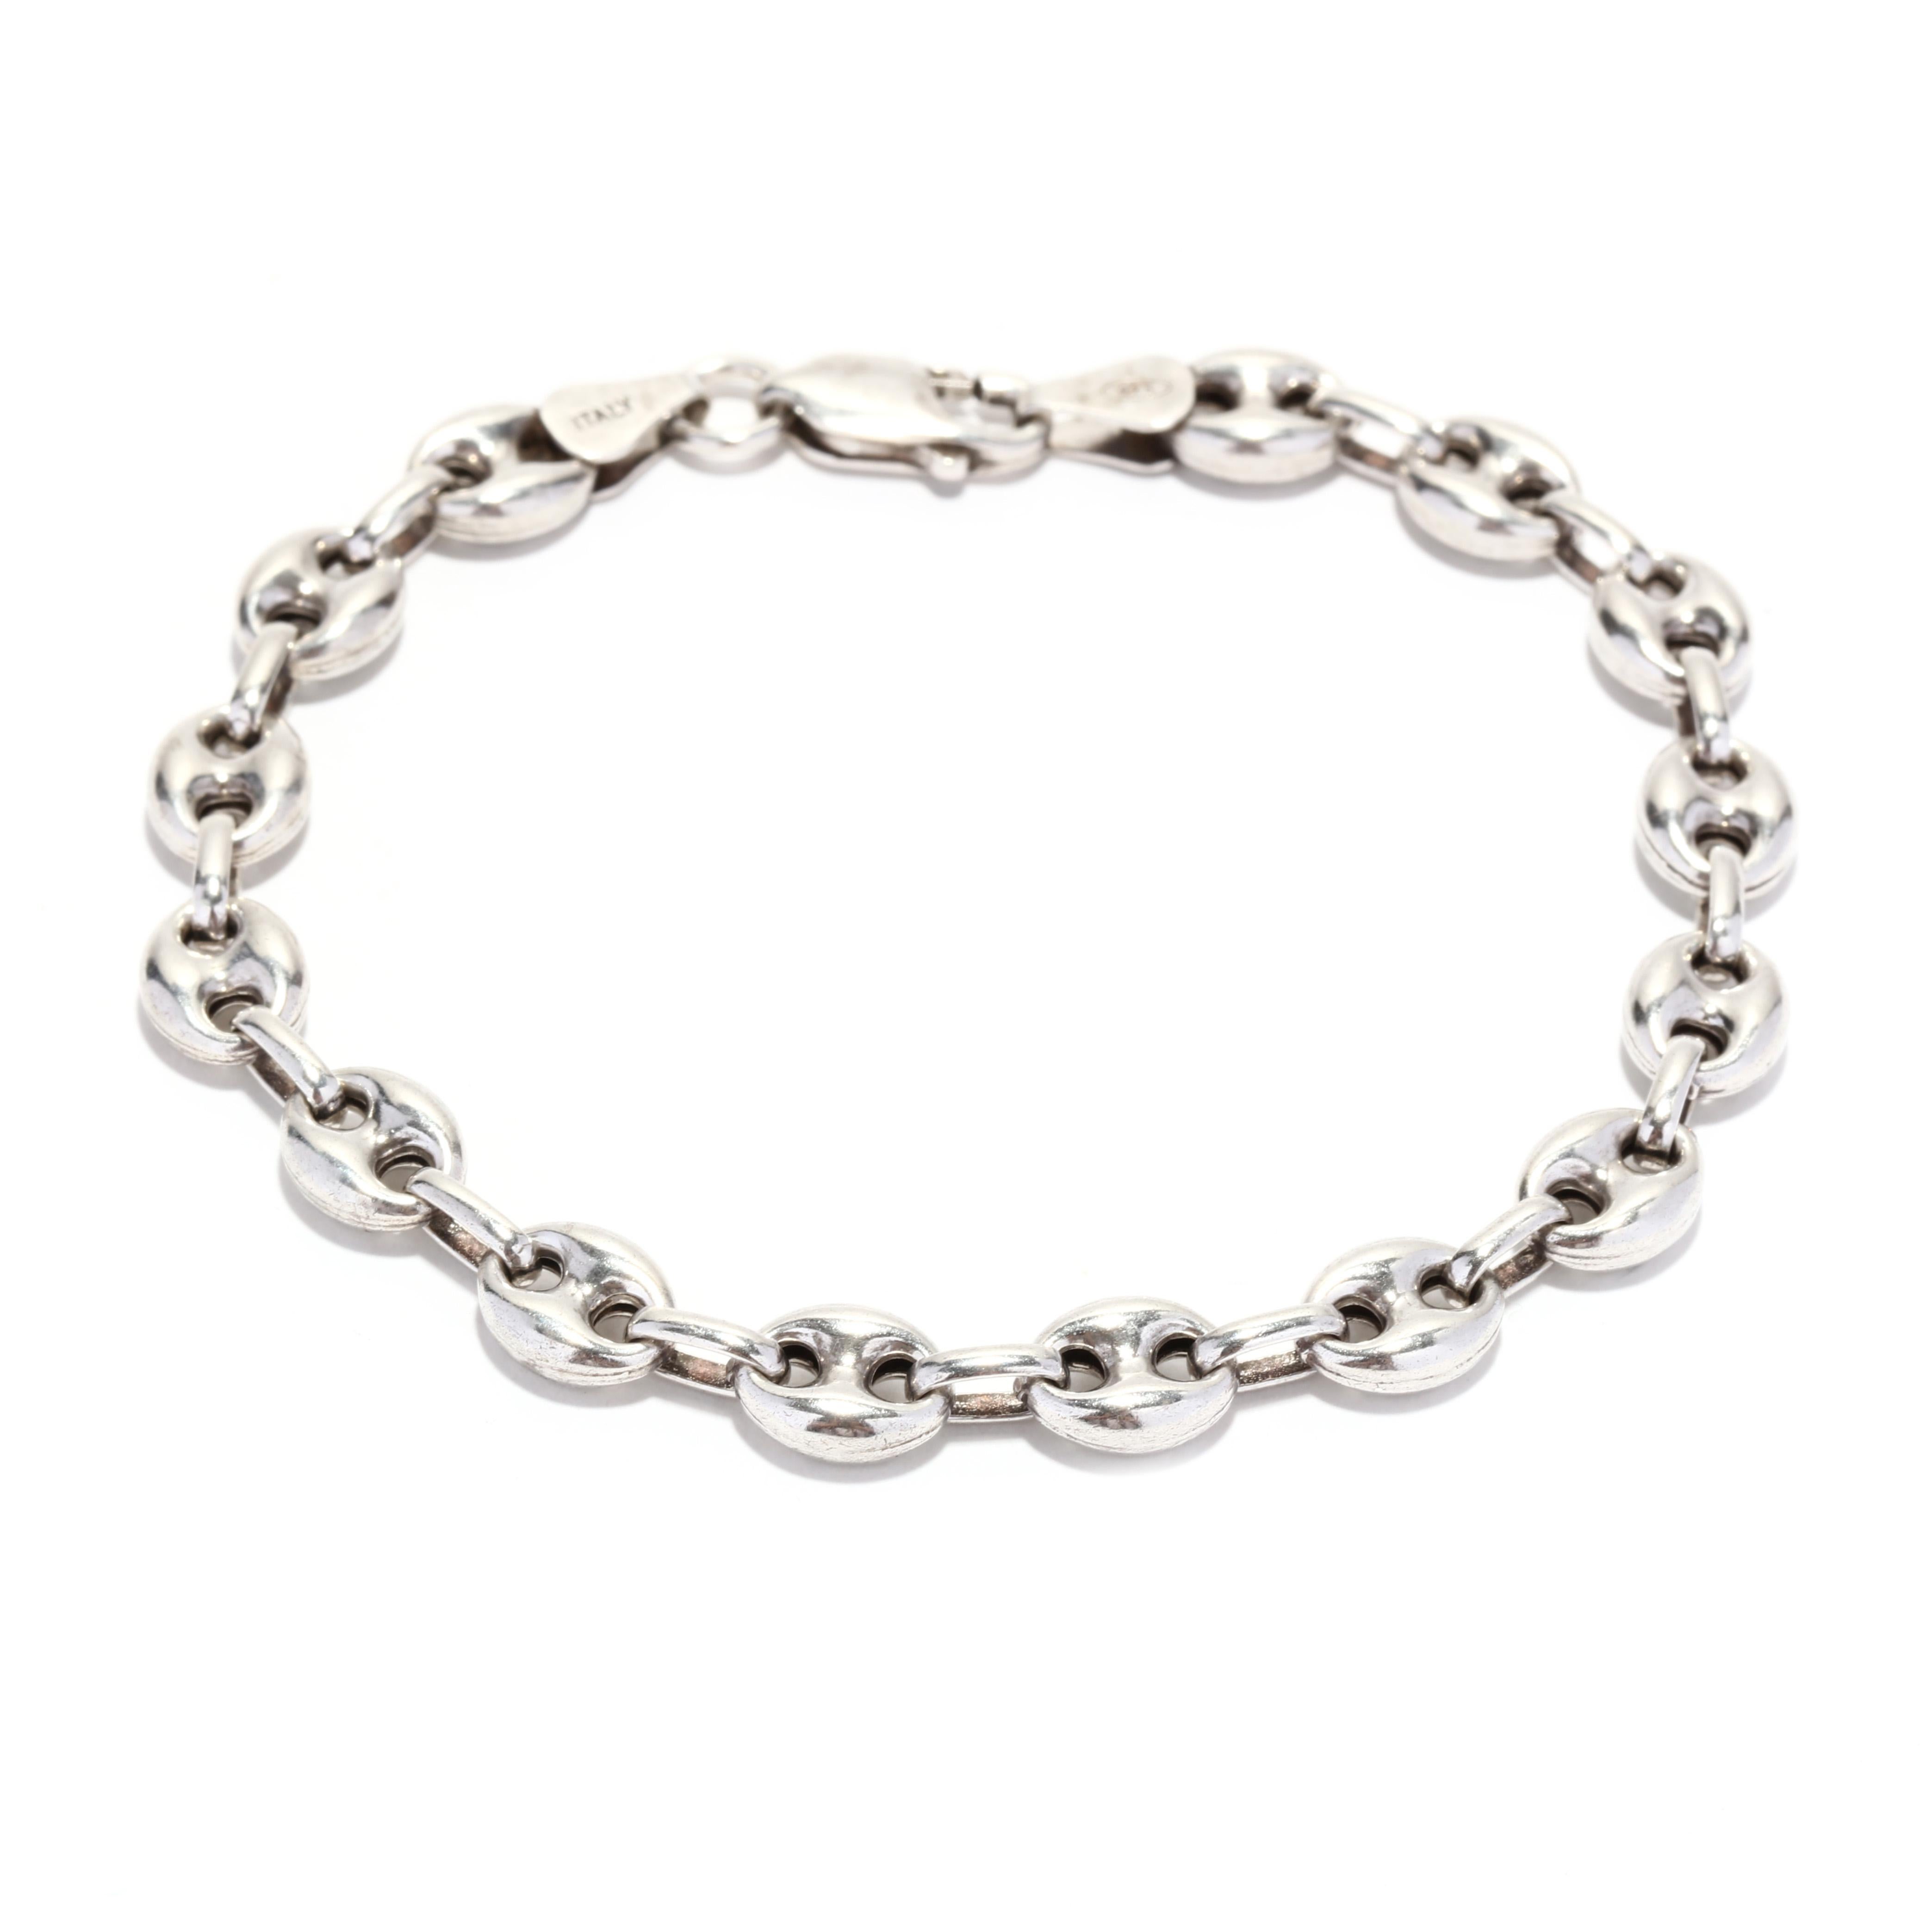 A vintage sterling silver puff anchor chain link bracelet. This simple chain bracelet features puffed anchor links connected with thin oval links and with a lobster clasp.

Length: 7.75 in.

Width: 1/4 in.

Weight: 6.4 dwts. / 10 grams

Stamps: 925